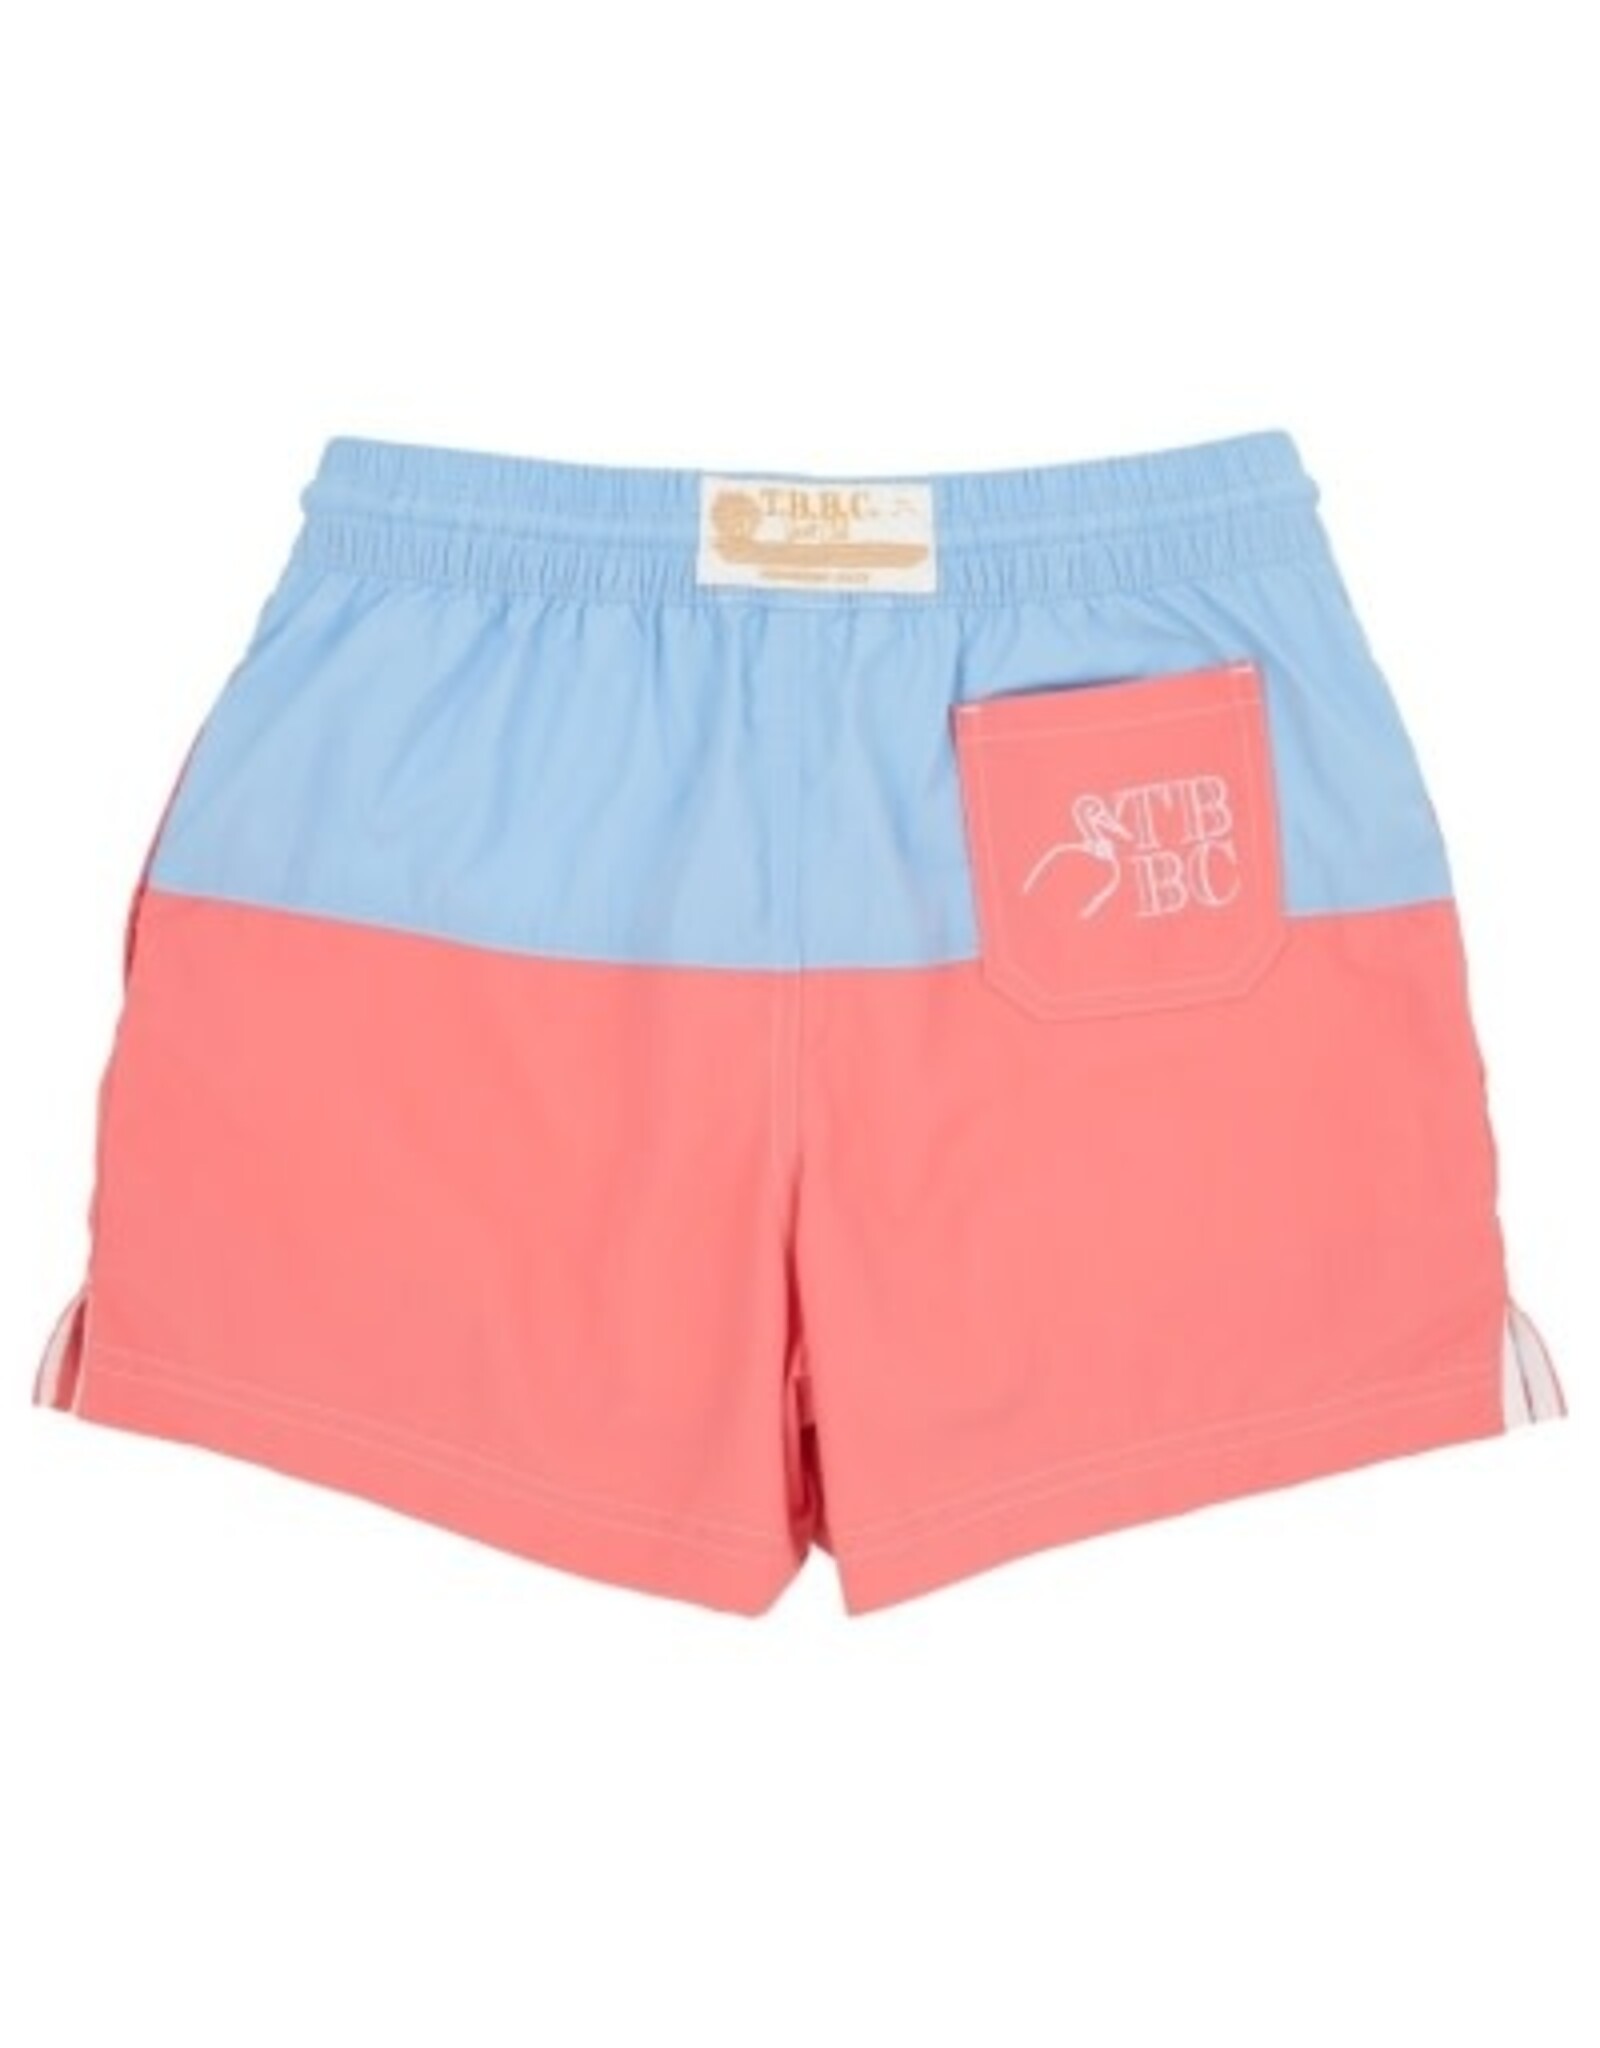 The Beaufort Bonnet Company Country Club Colorblock Trunk